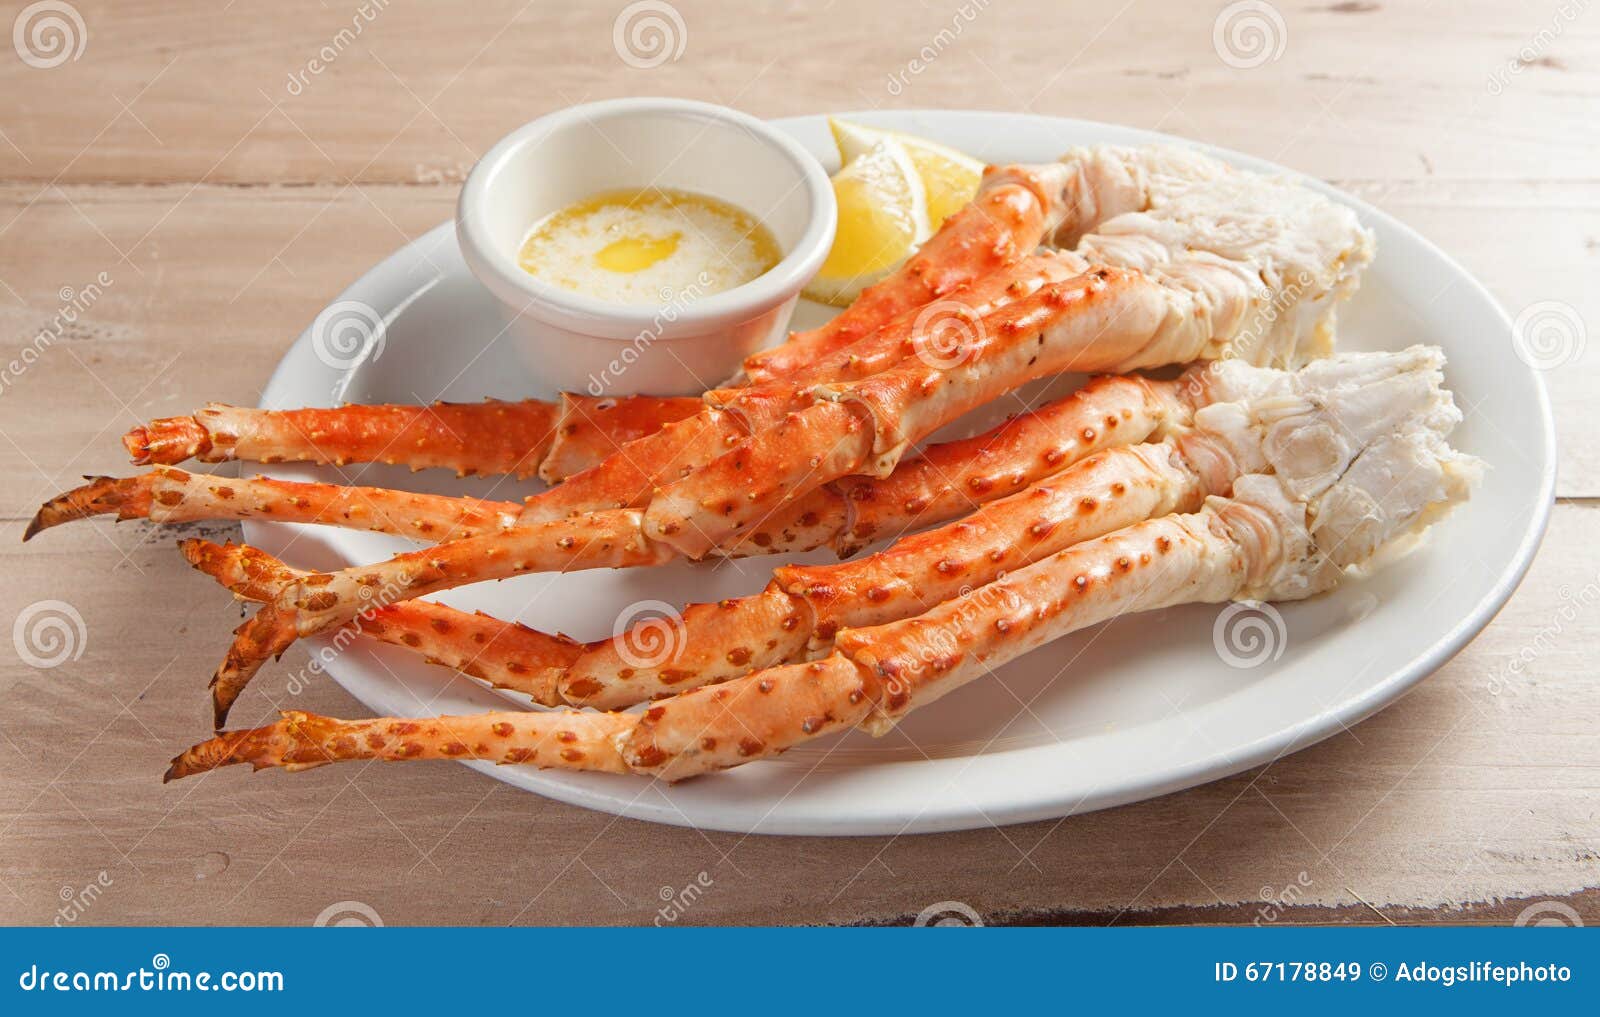 plate of snow crab legs